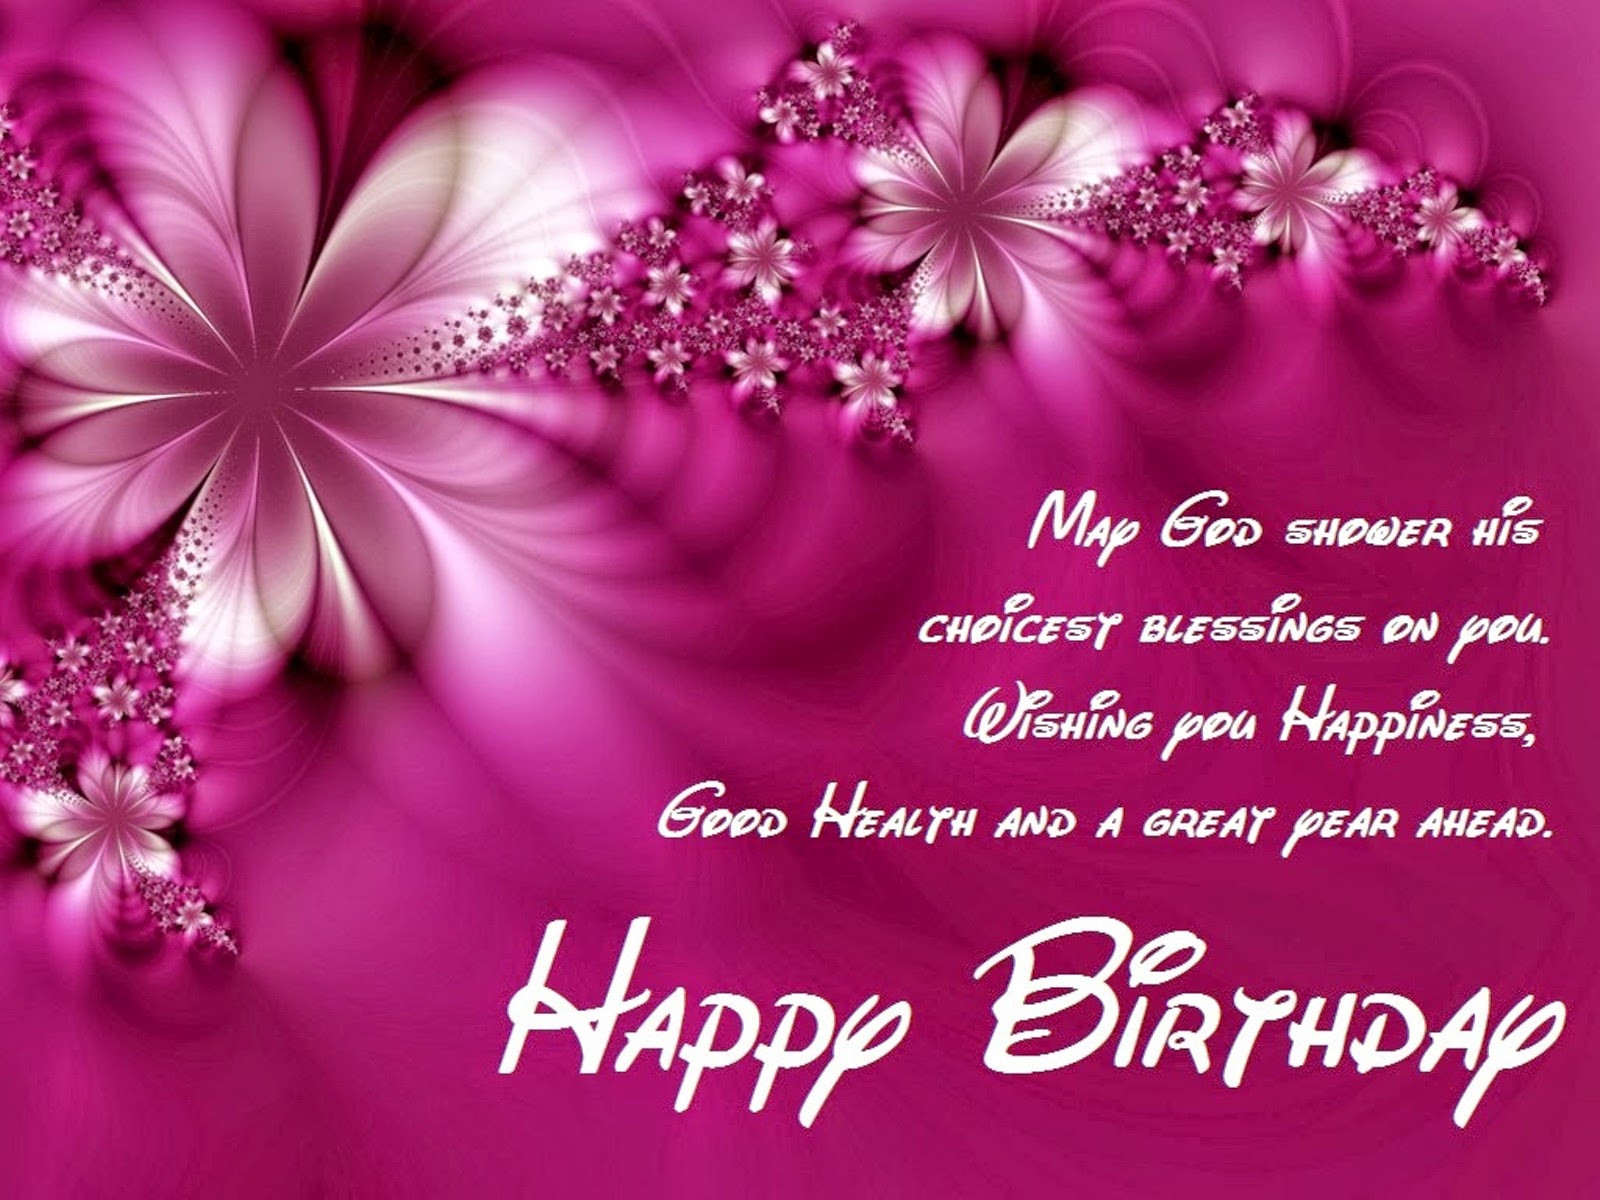 Inspirational Birthday Wishes For A Niece
 Inspirational Quotes For Niece Birthday QuotesGram